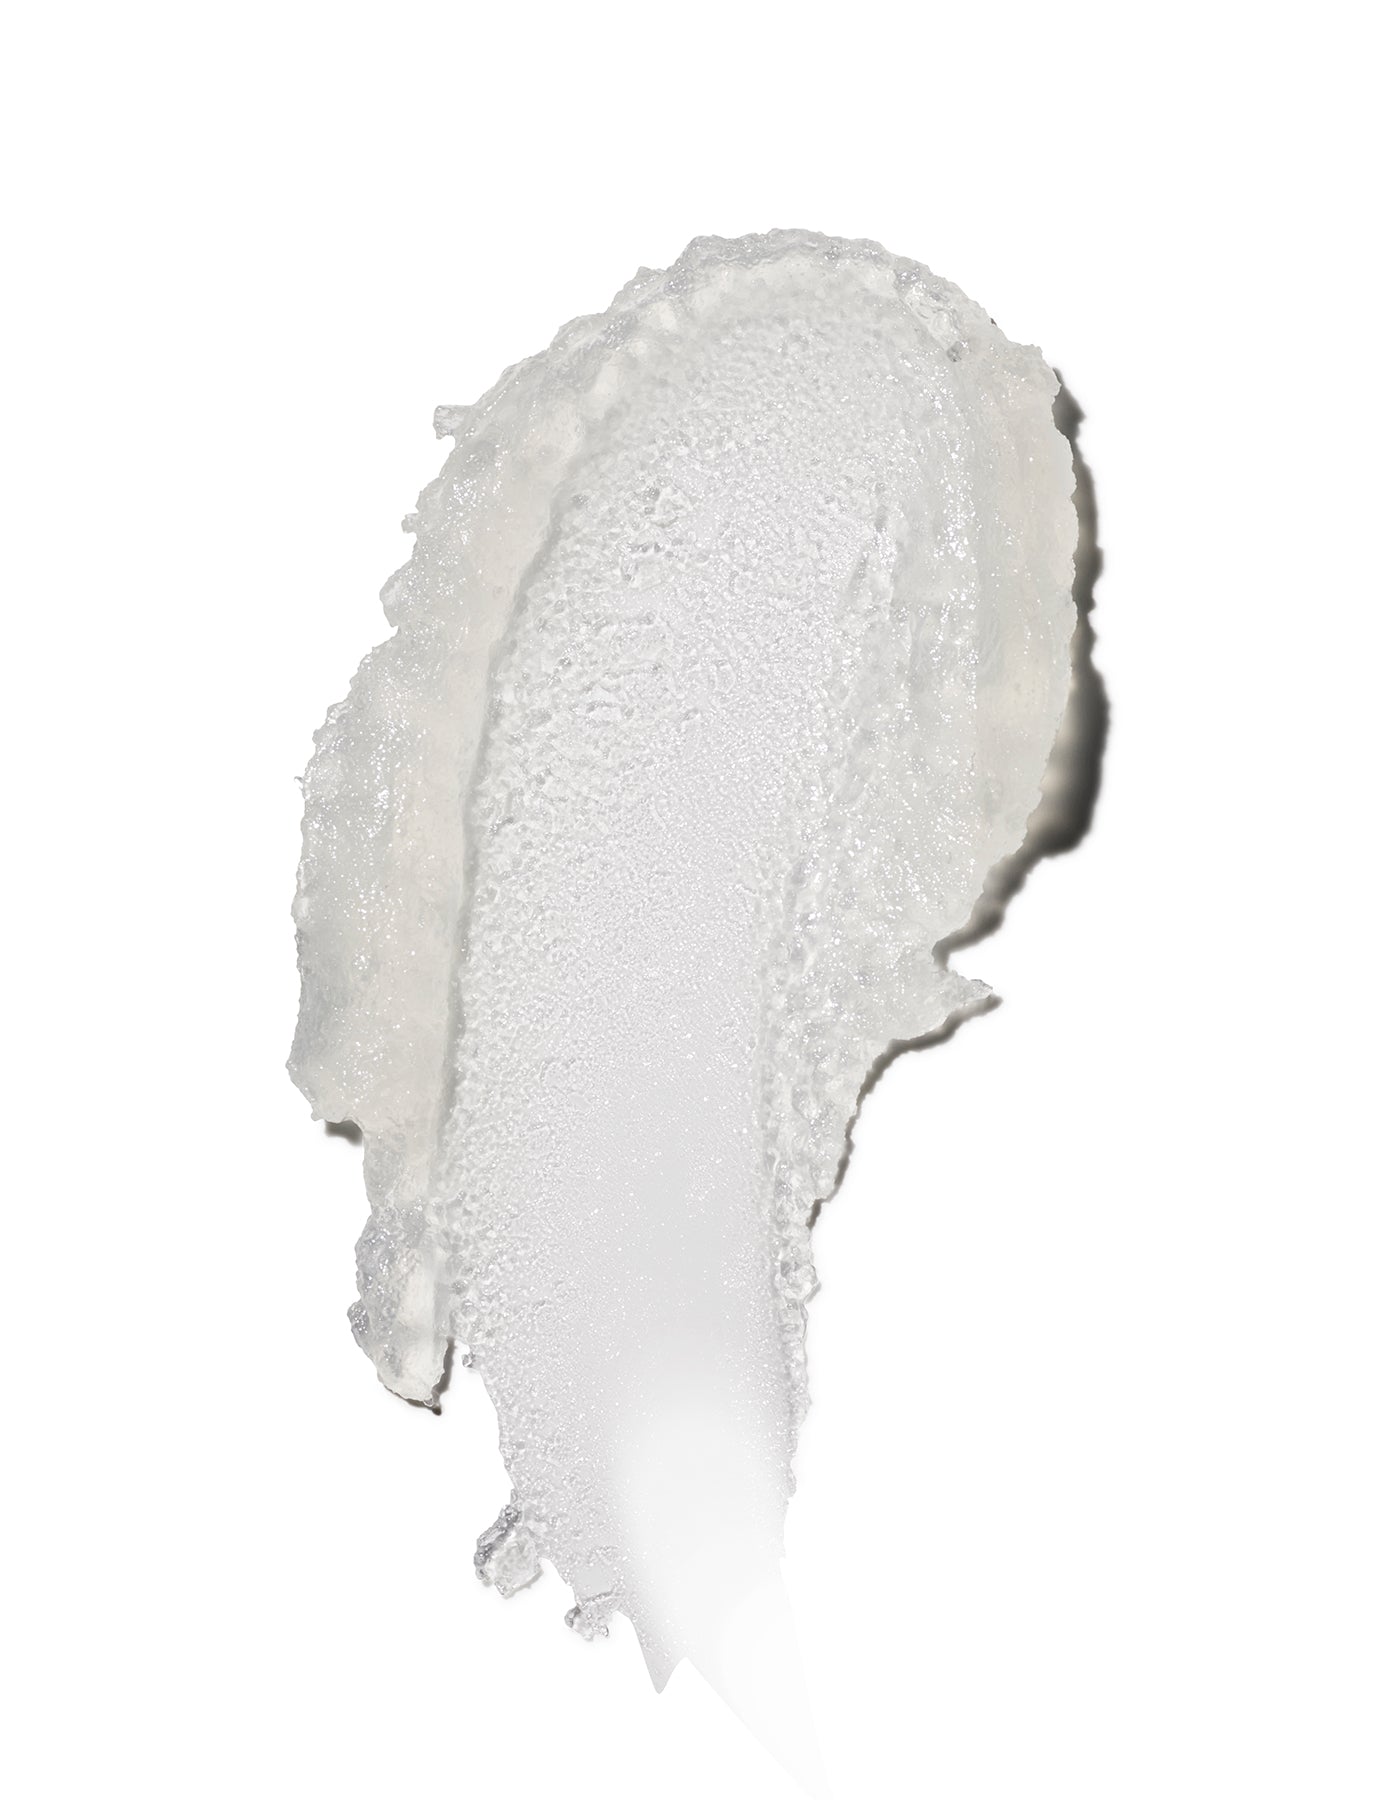 swatch of Jones Road Cleansing Stick